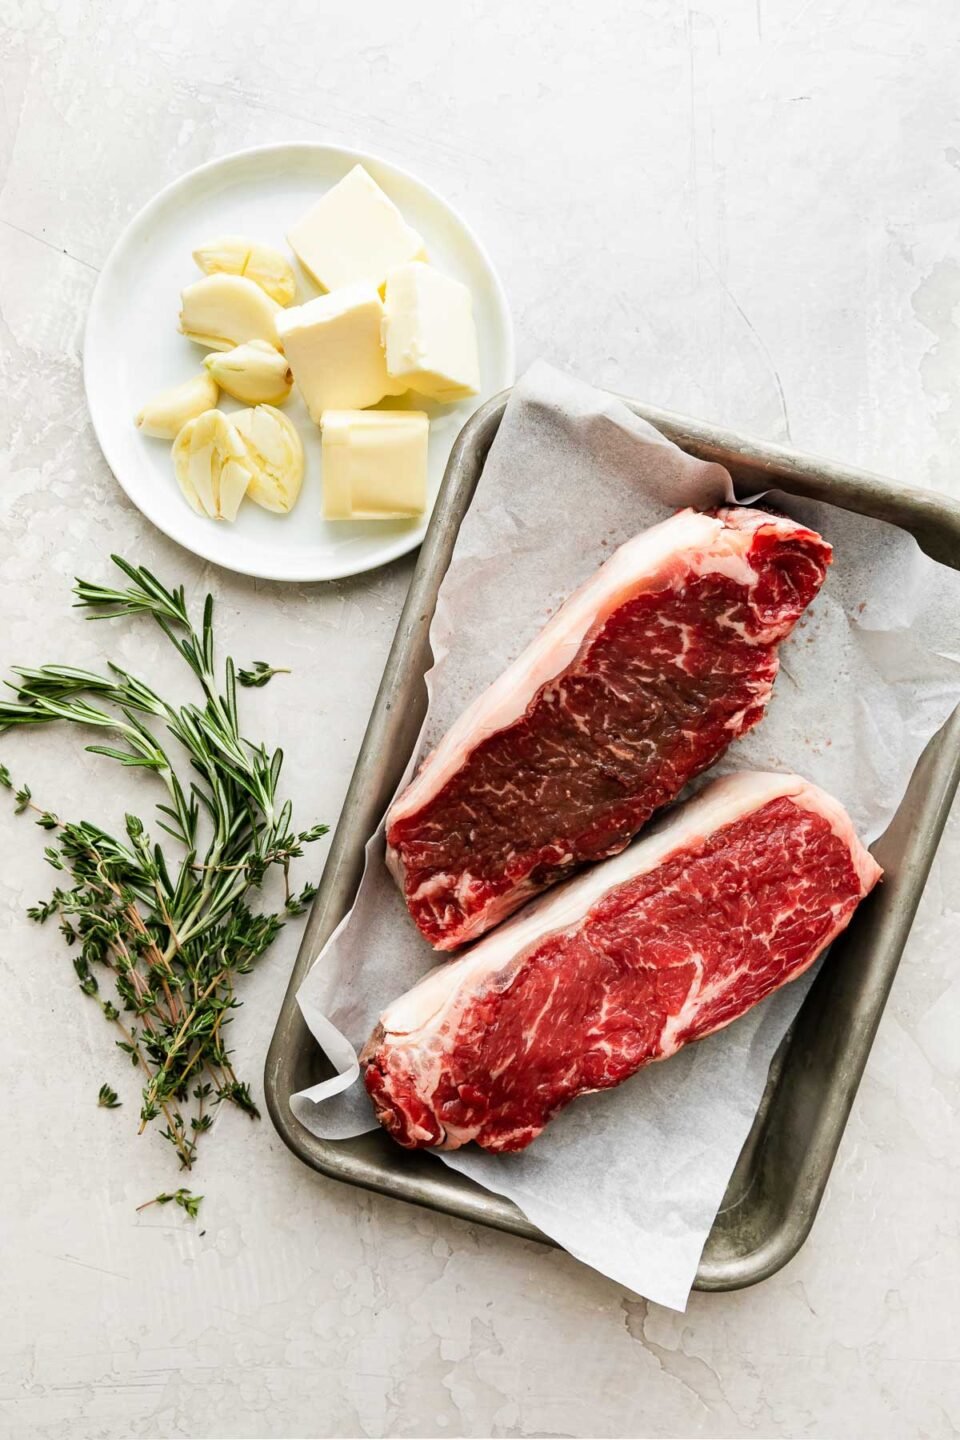 https://playswellwithbutter.com/wp-content/uploads/2022/05/Perfect-Grilled-Steak-Butter-Basted-with-Herb-Brush-1-960x1440.jpg